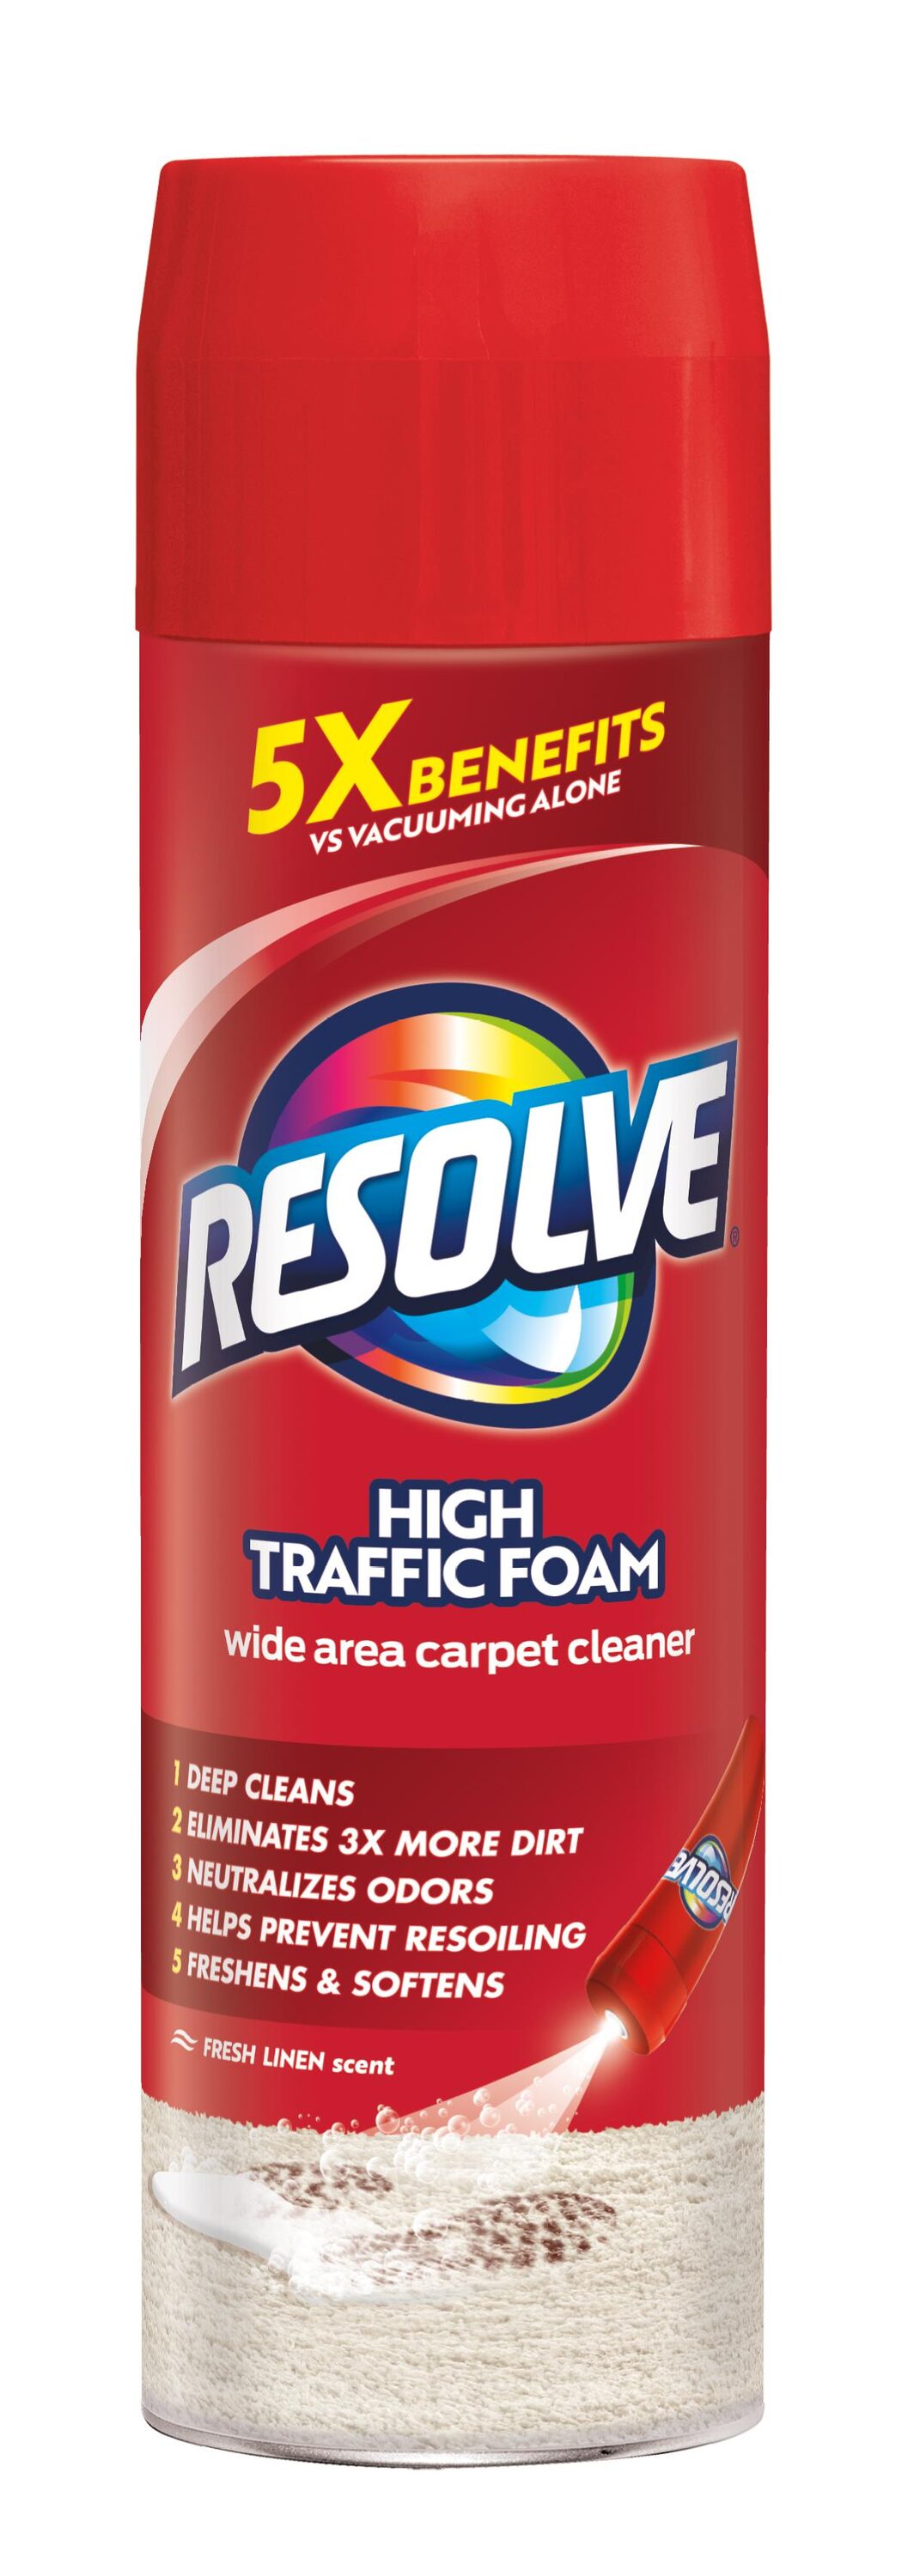 Resolve 22 fl oz Multi-Fabric Cleaner and Upholstery Stain Remover